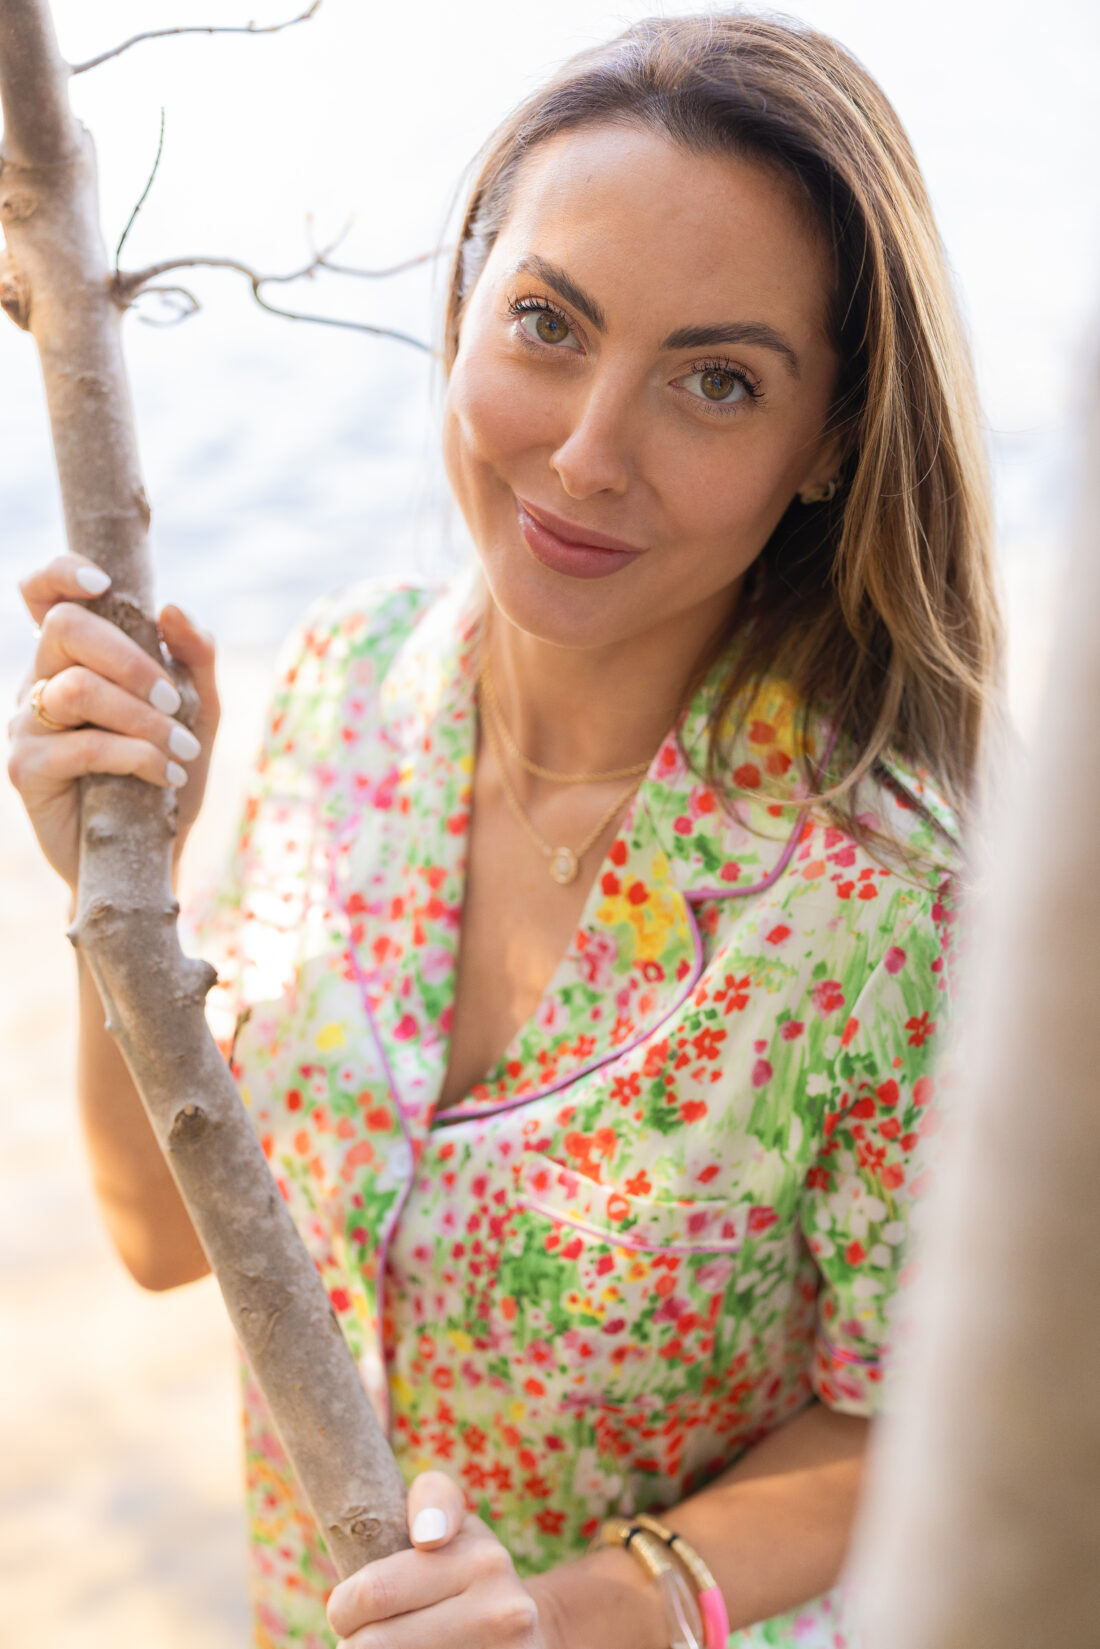 Eva Amurri shares the HEA Collection Lake House Series in detail